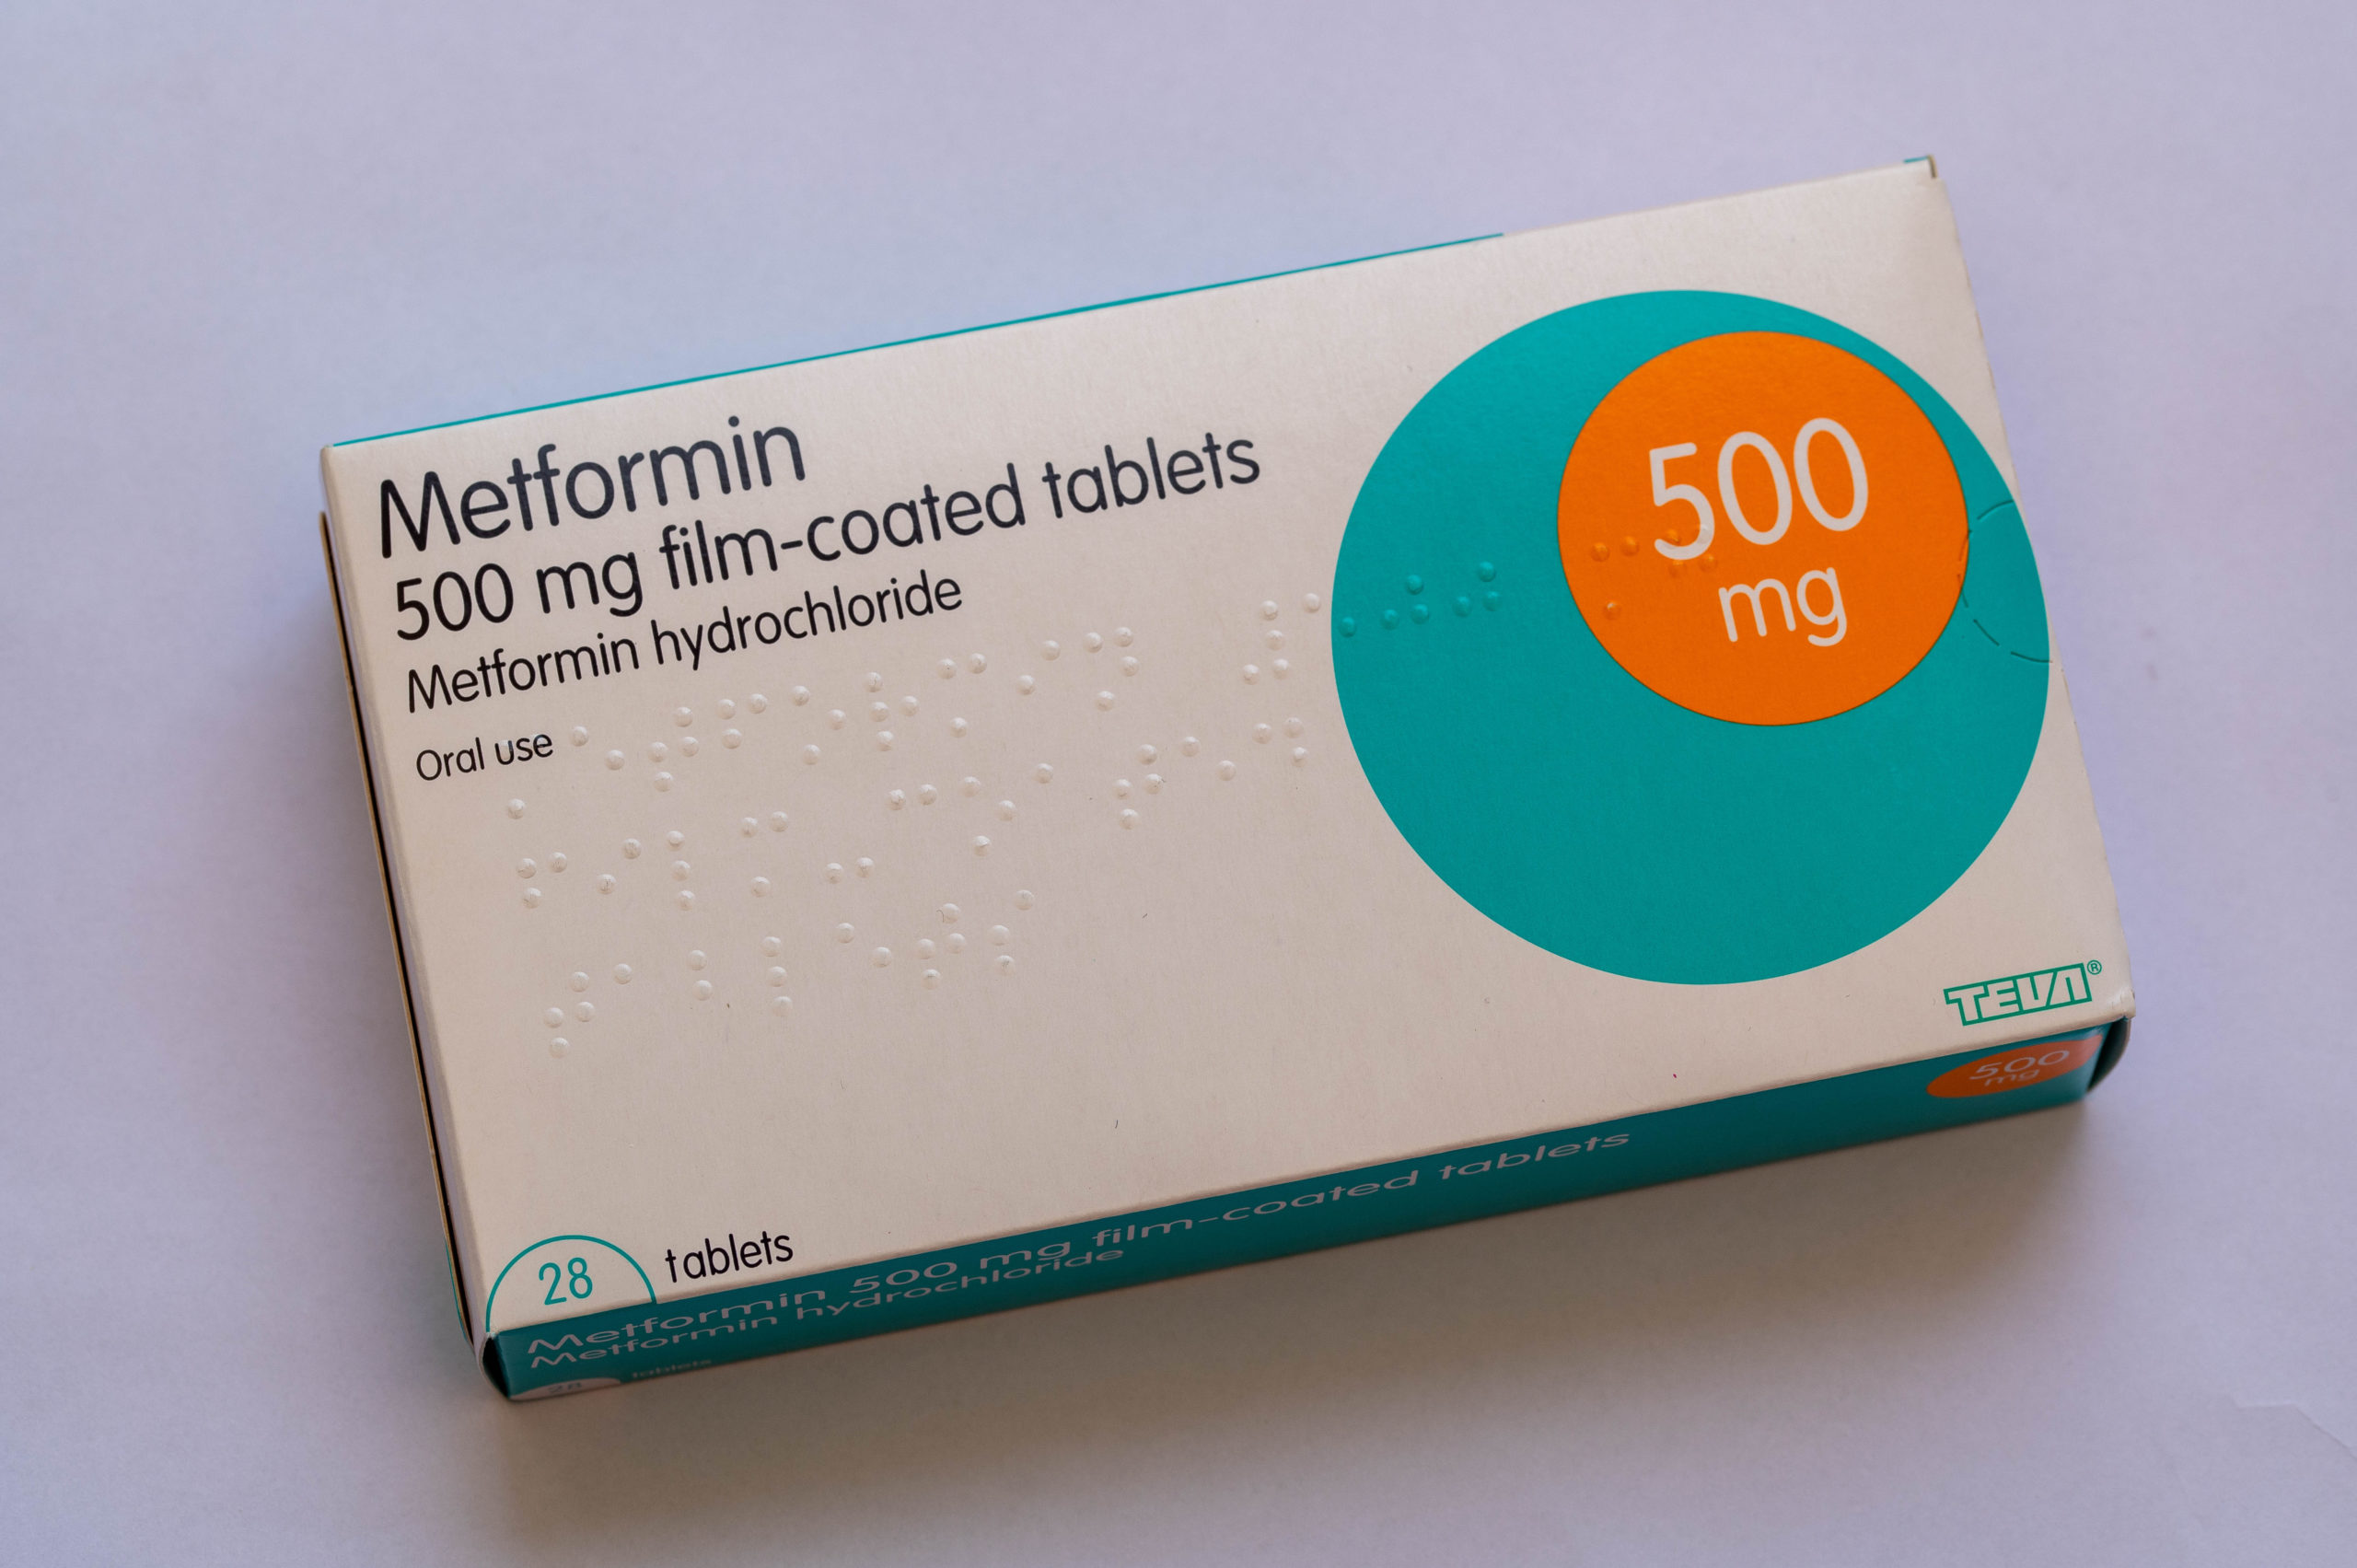 Combined Metformin, Testosterone Replacement Linked With Lower Risk of Prostate, Colorectal Cancer